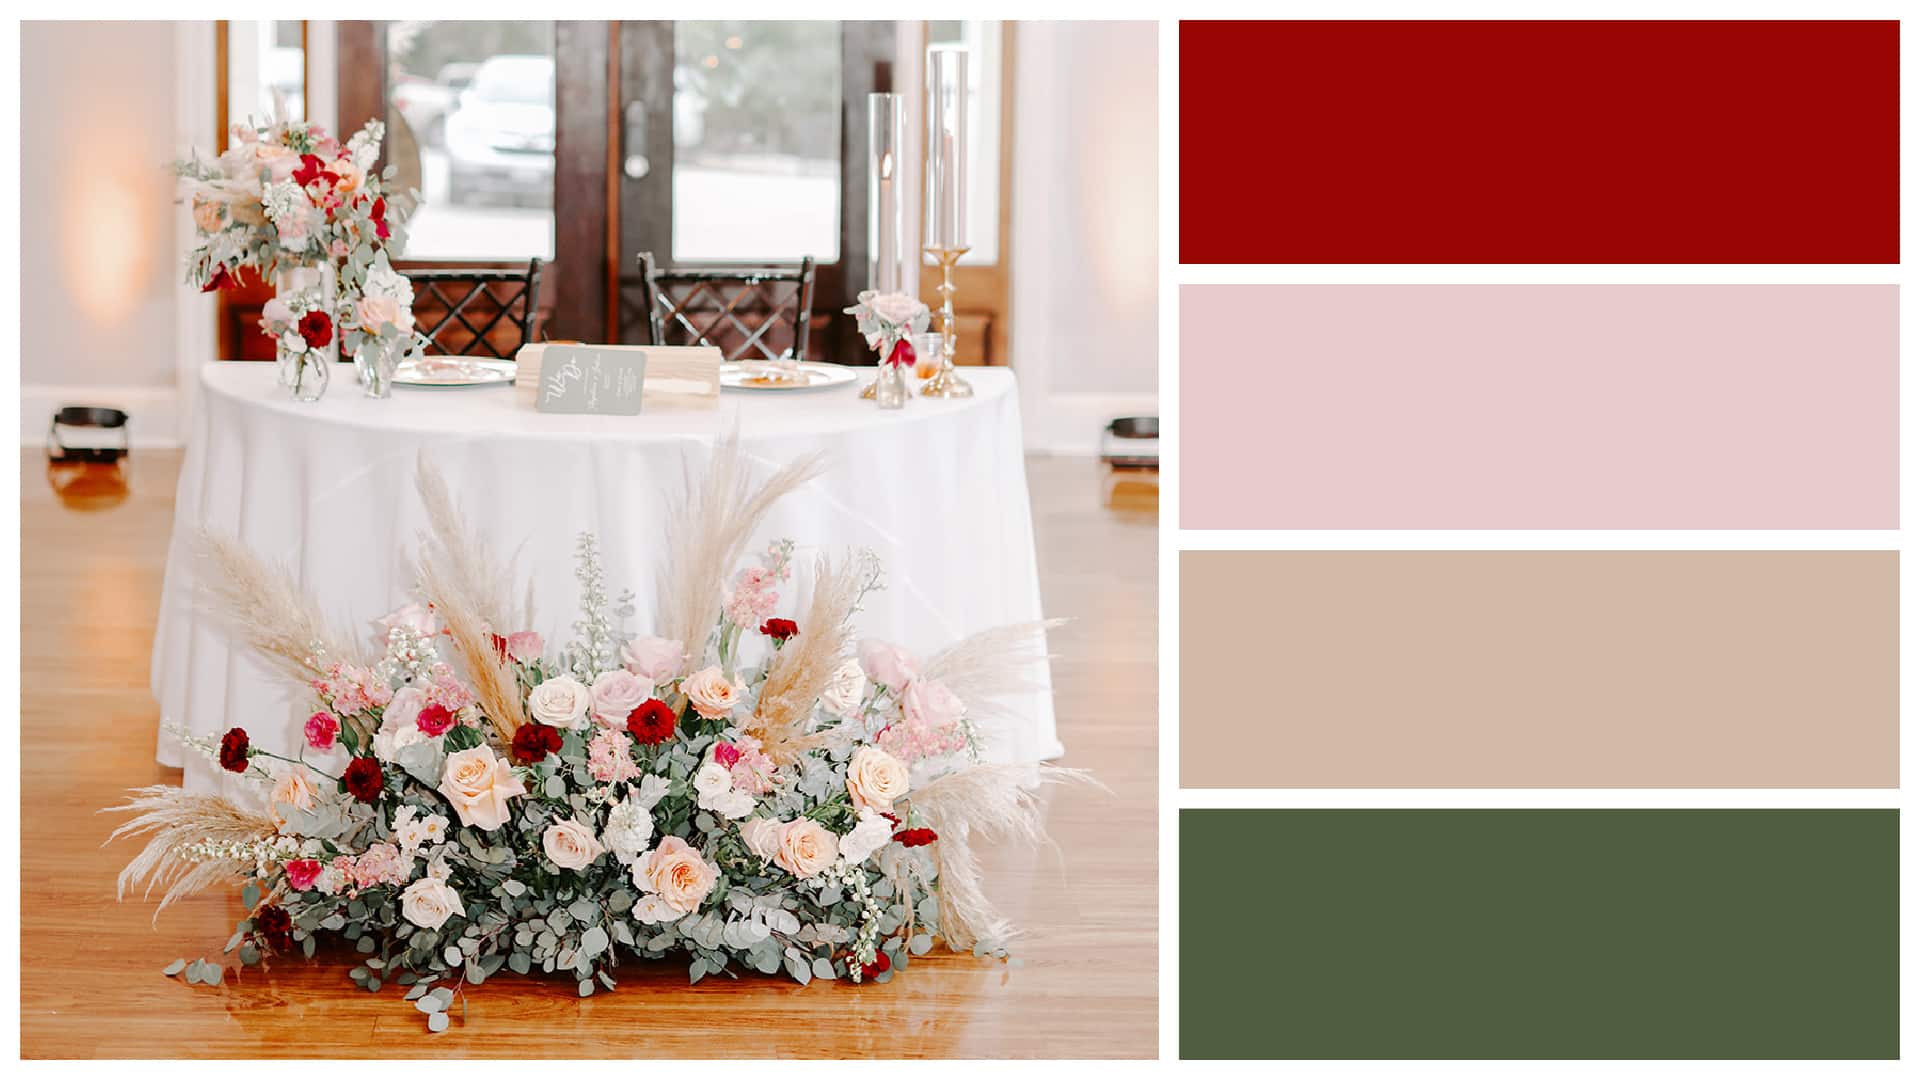 sweetheart table with color palette of red, taupe, and green